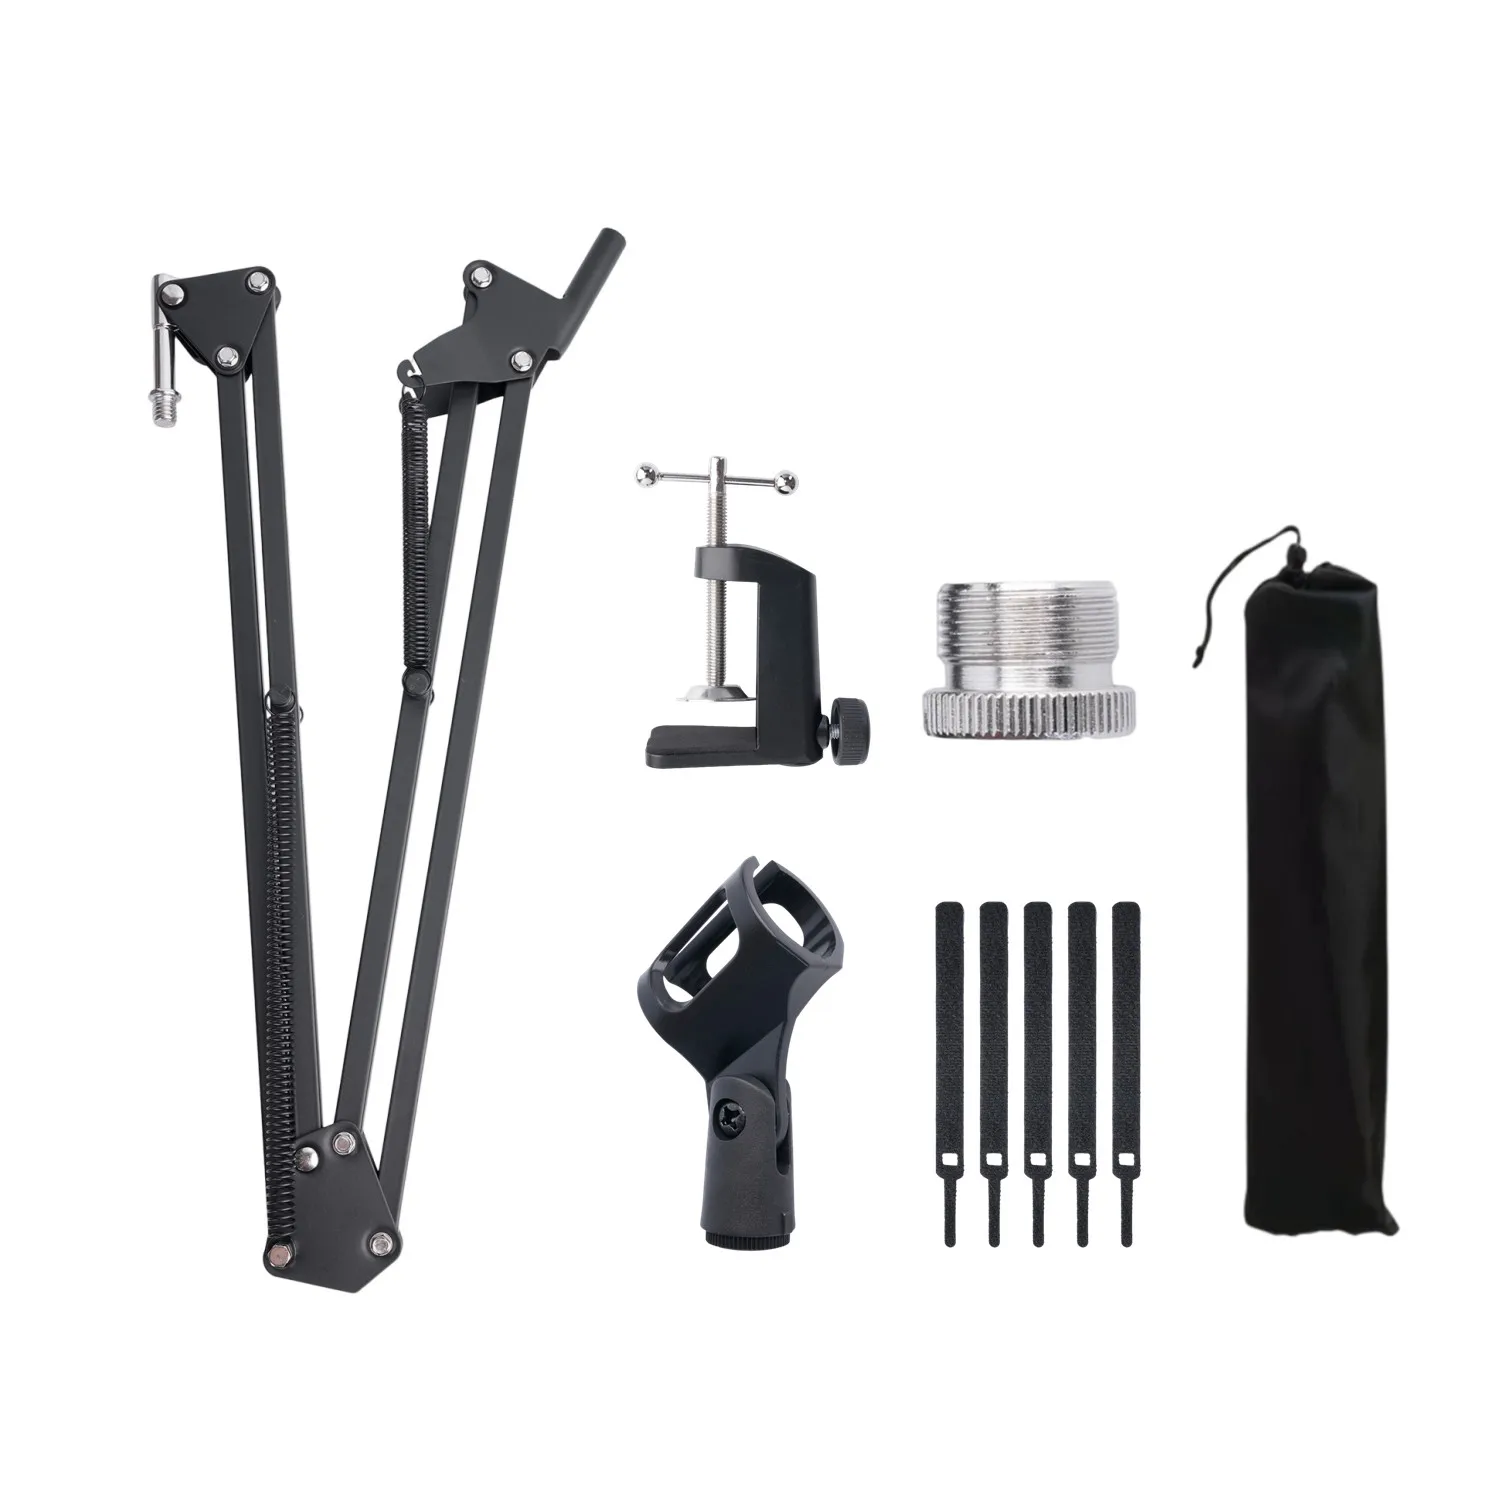 Extendable Recording Microphone Holder Suspension Boom Scissor Arm Stand Holder with Mic Clip Table Mounting Clamp images - 6